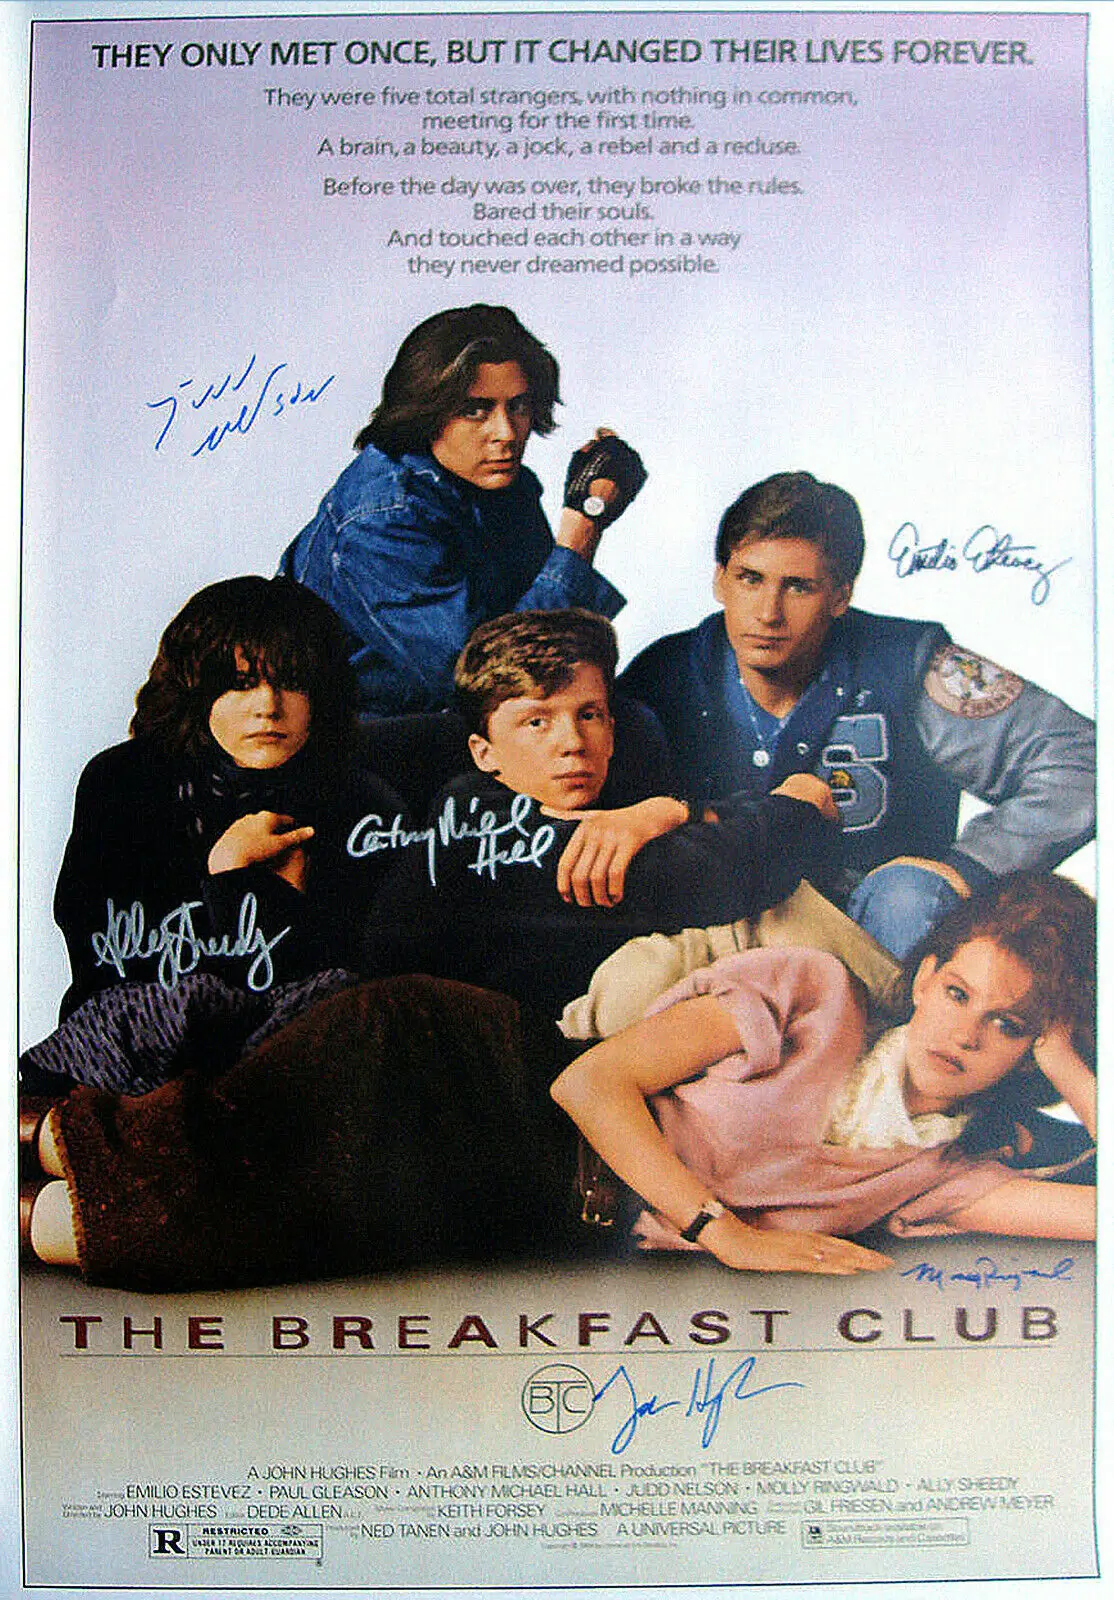 

THE BREAKFAST CLUB MOVIE Signed Photo Art Film Print Silk Poster for Your Home Wall Decor 24x36inch